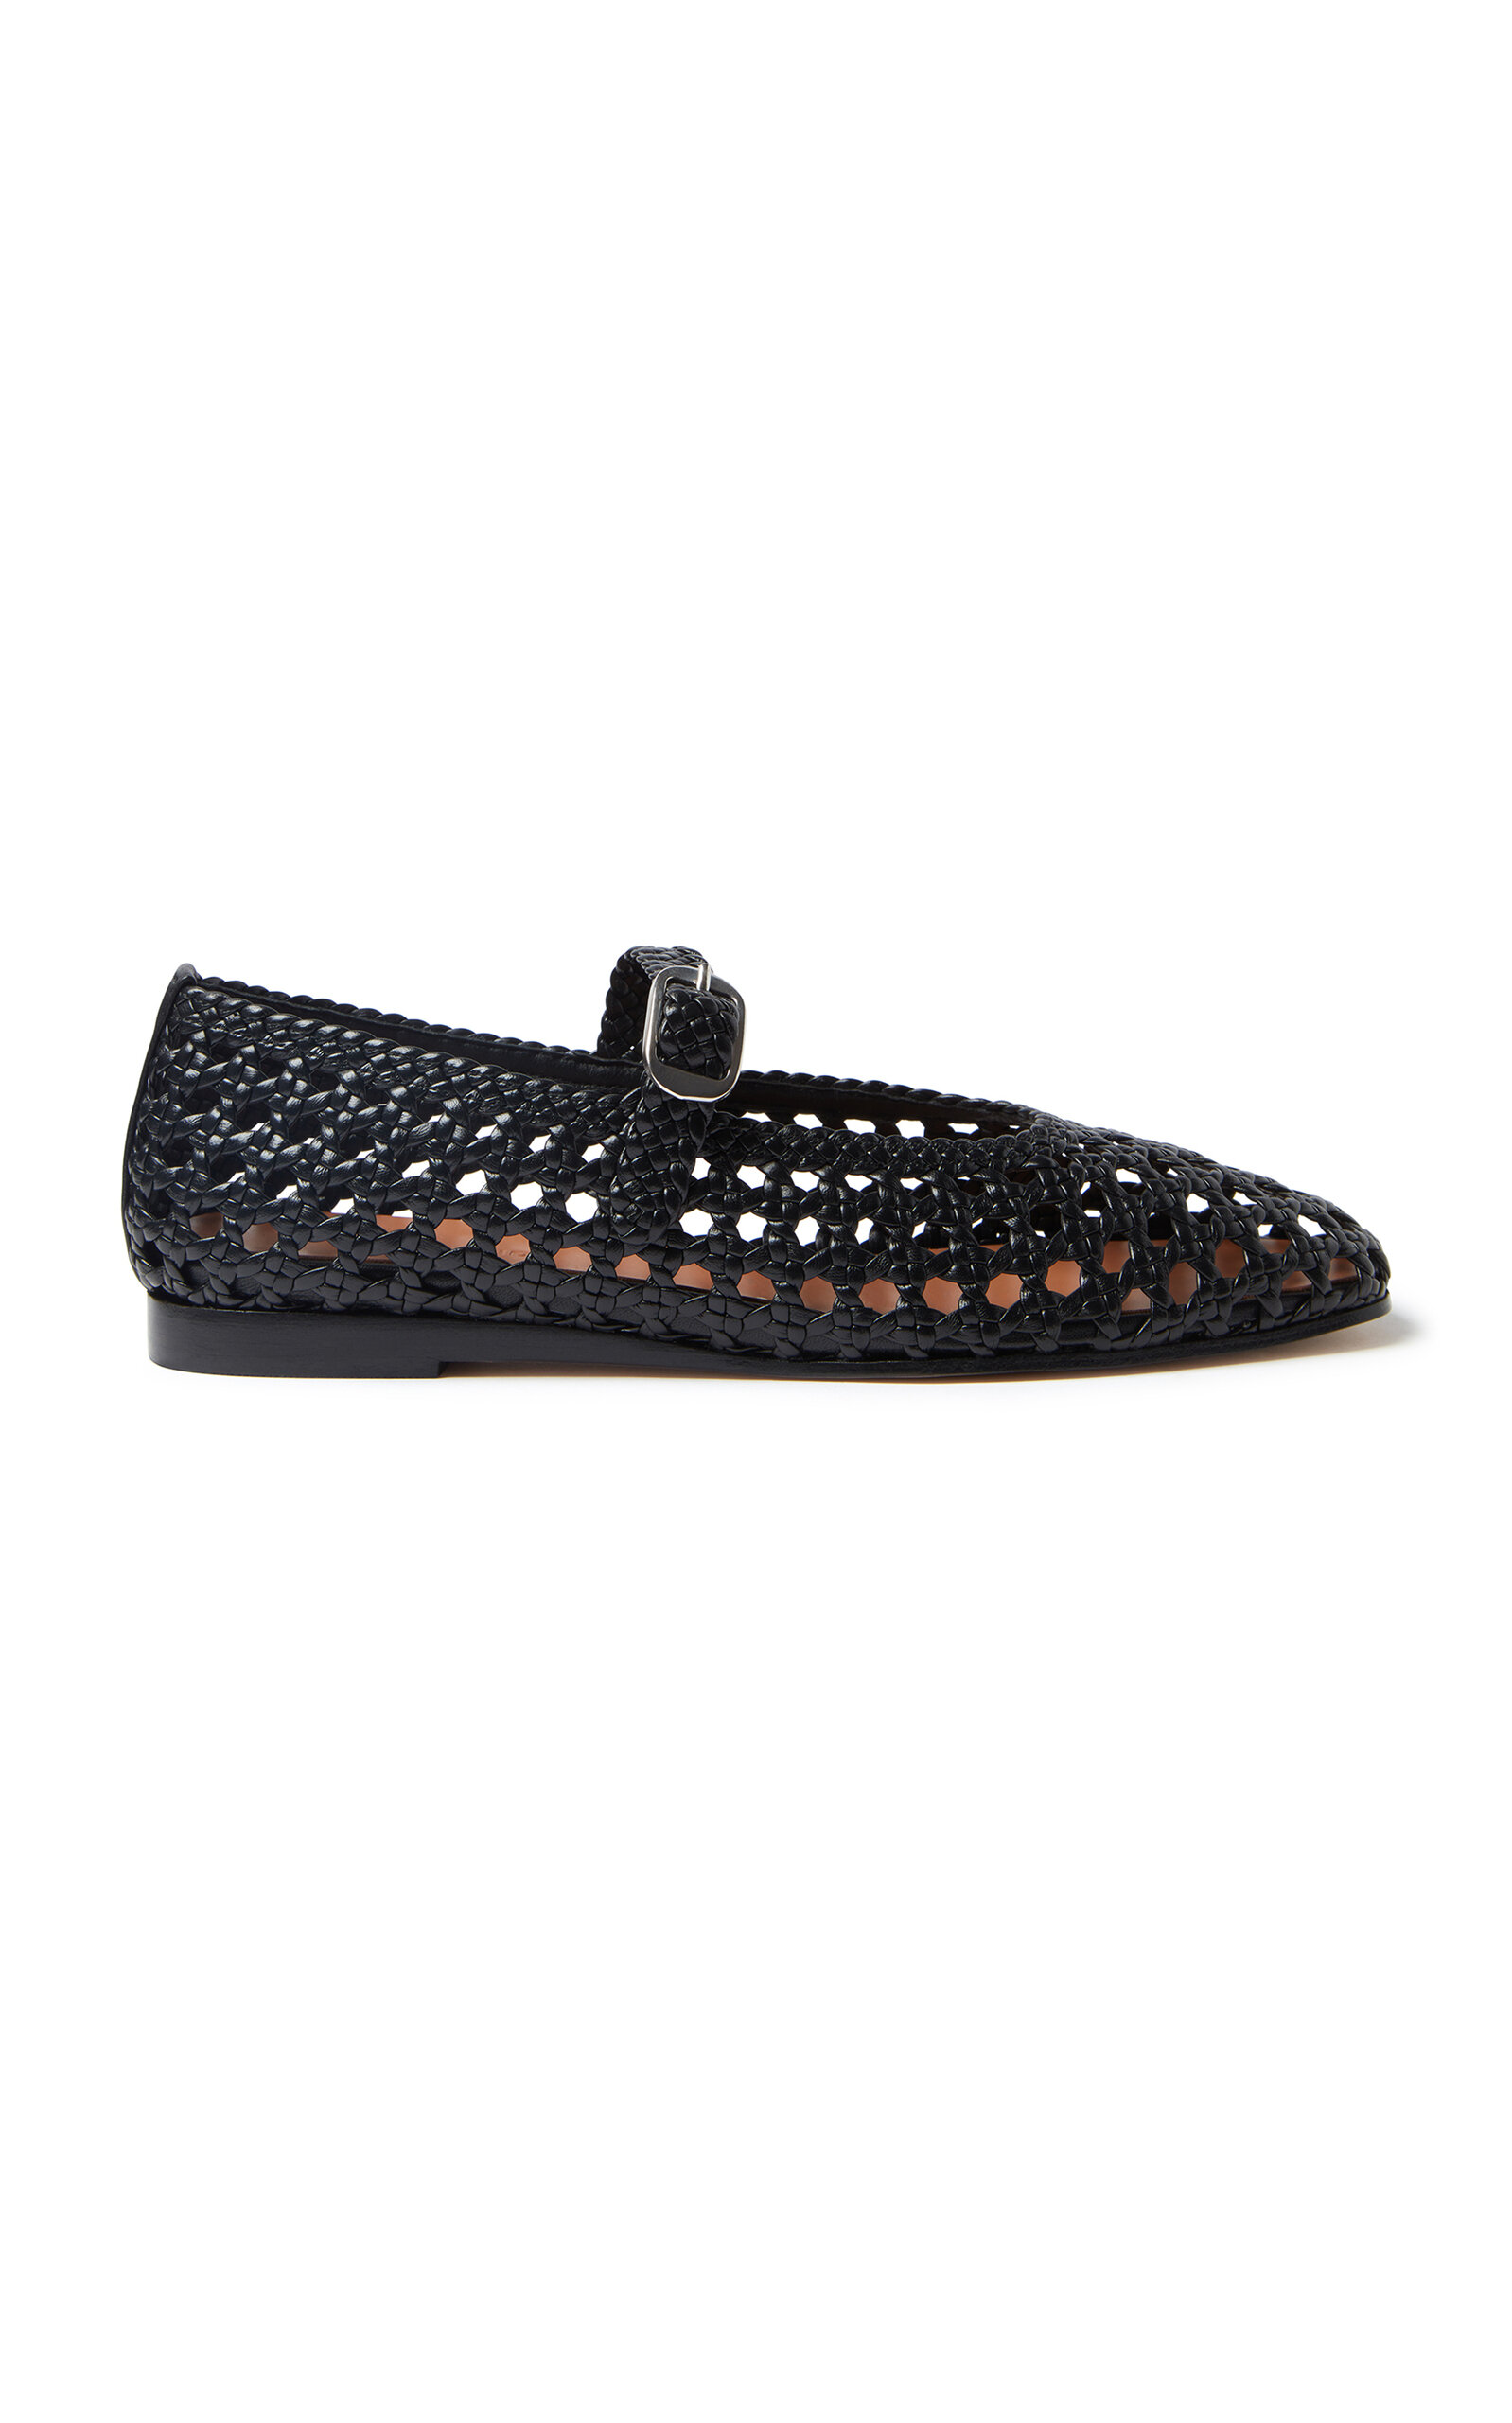 Woven Leather Mary Jane Flats